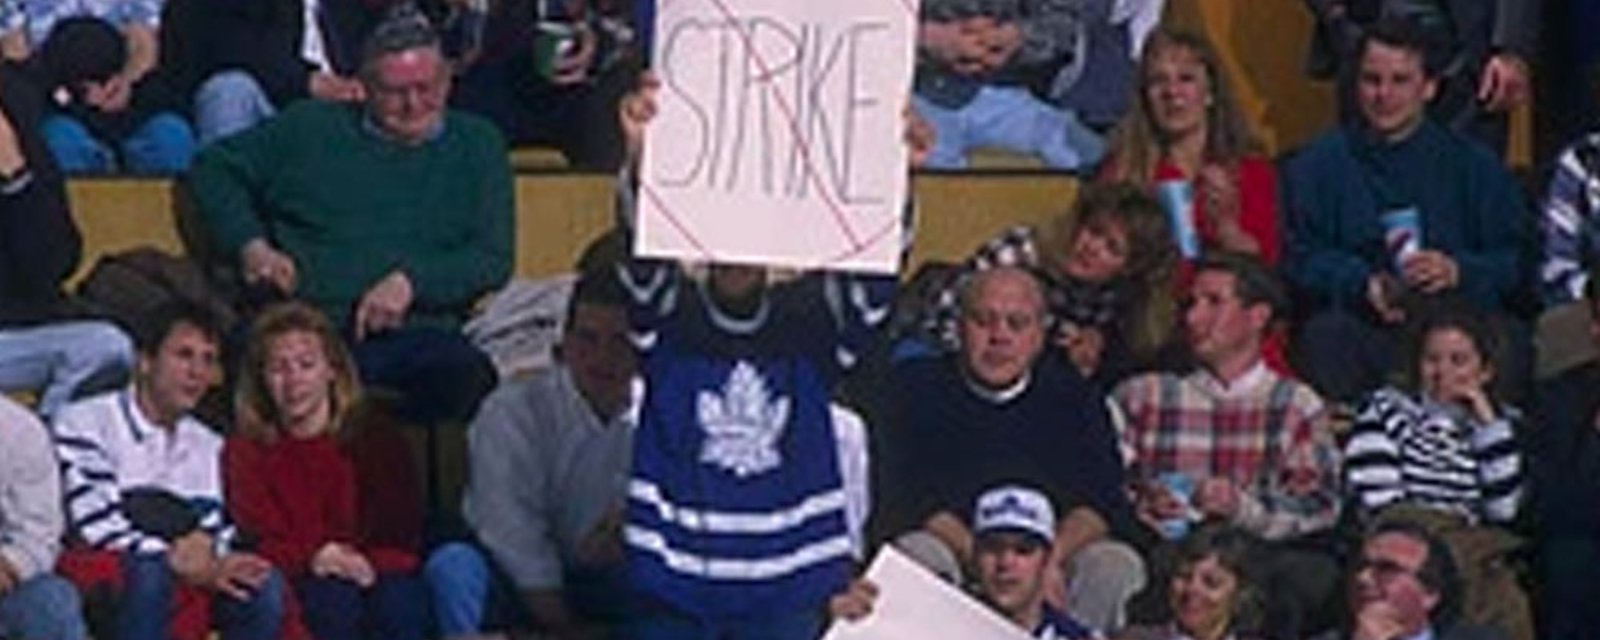 A players’ strike BEFORE we get to see hockey?!